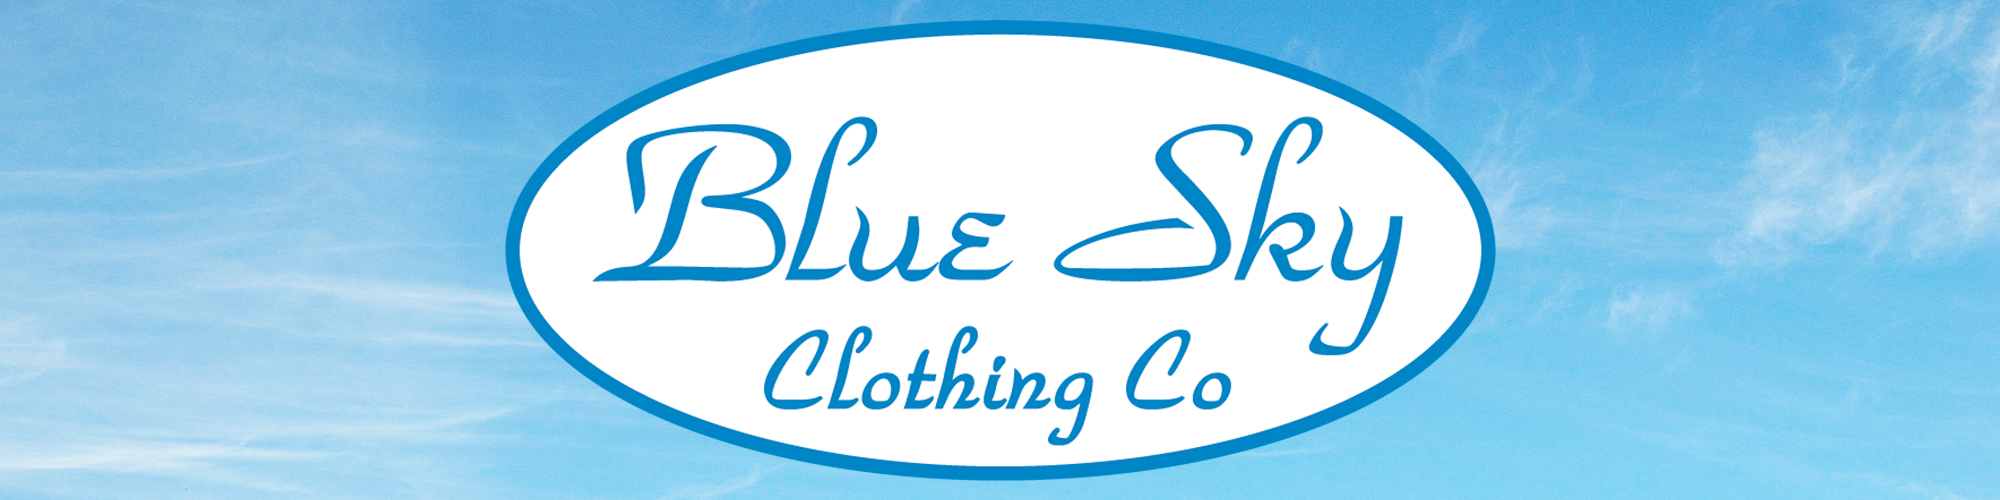 Blue Sky Clothing Co. (@blueskyclothingco) • Instagram photos and videos